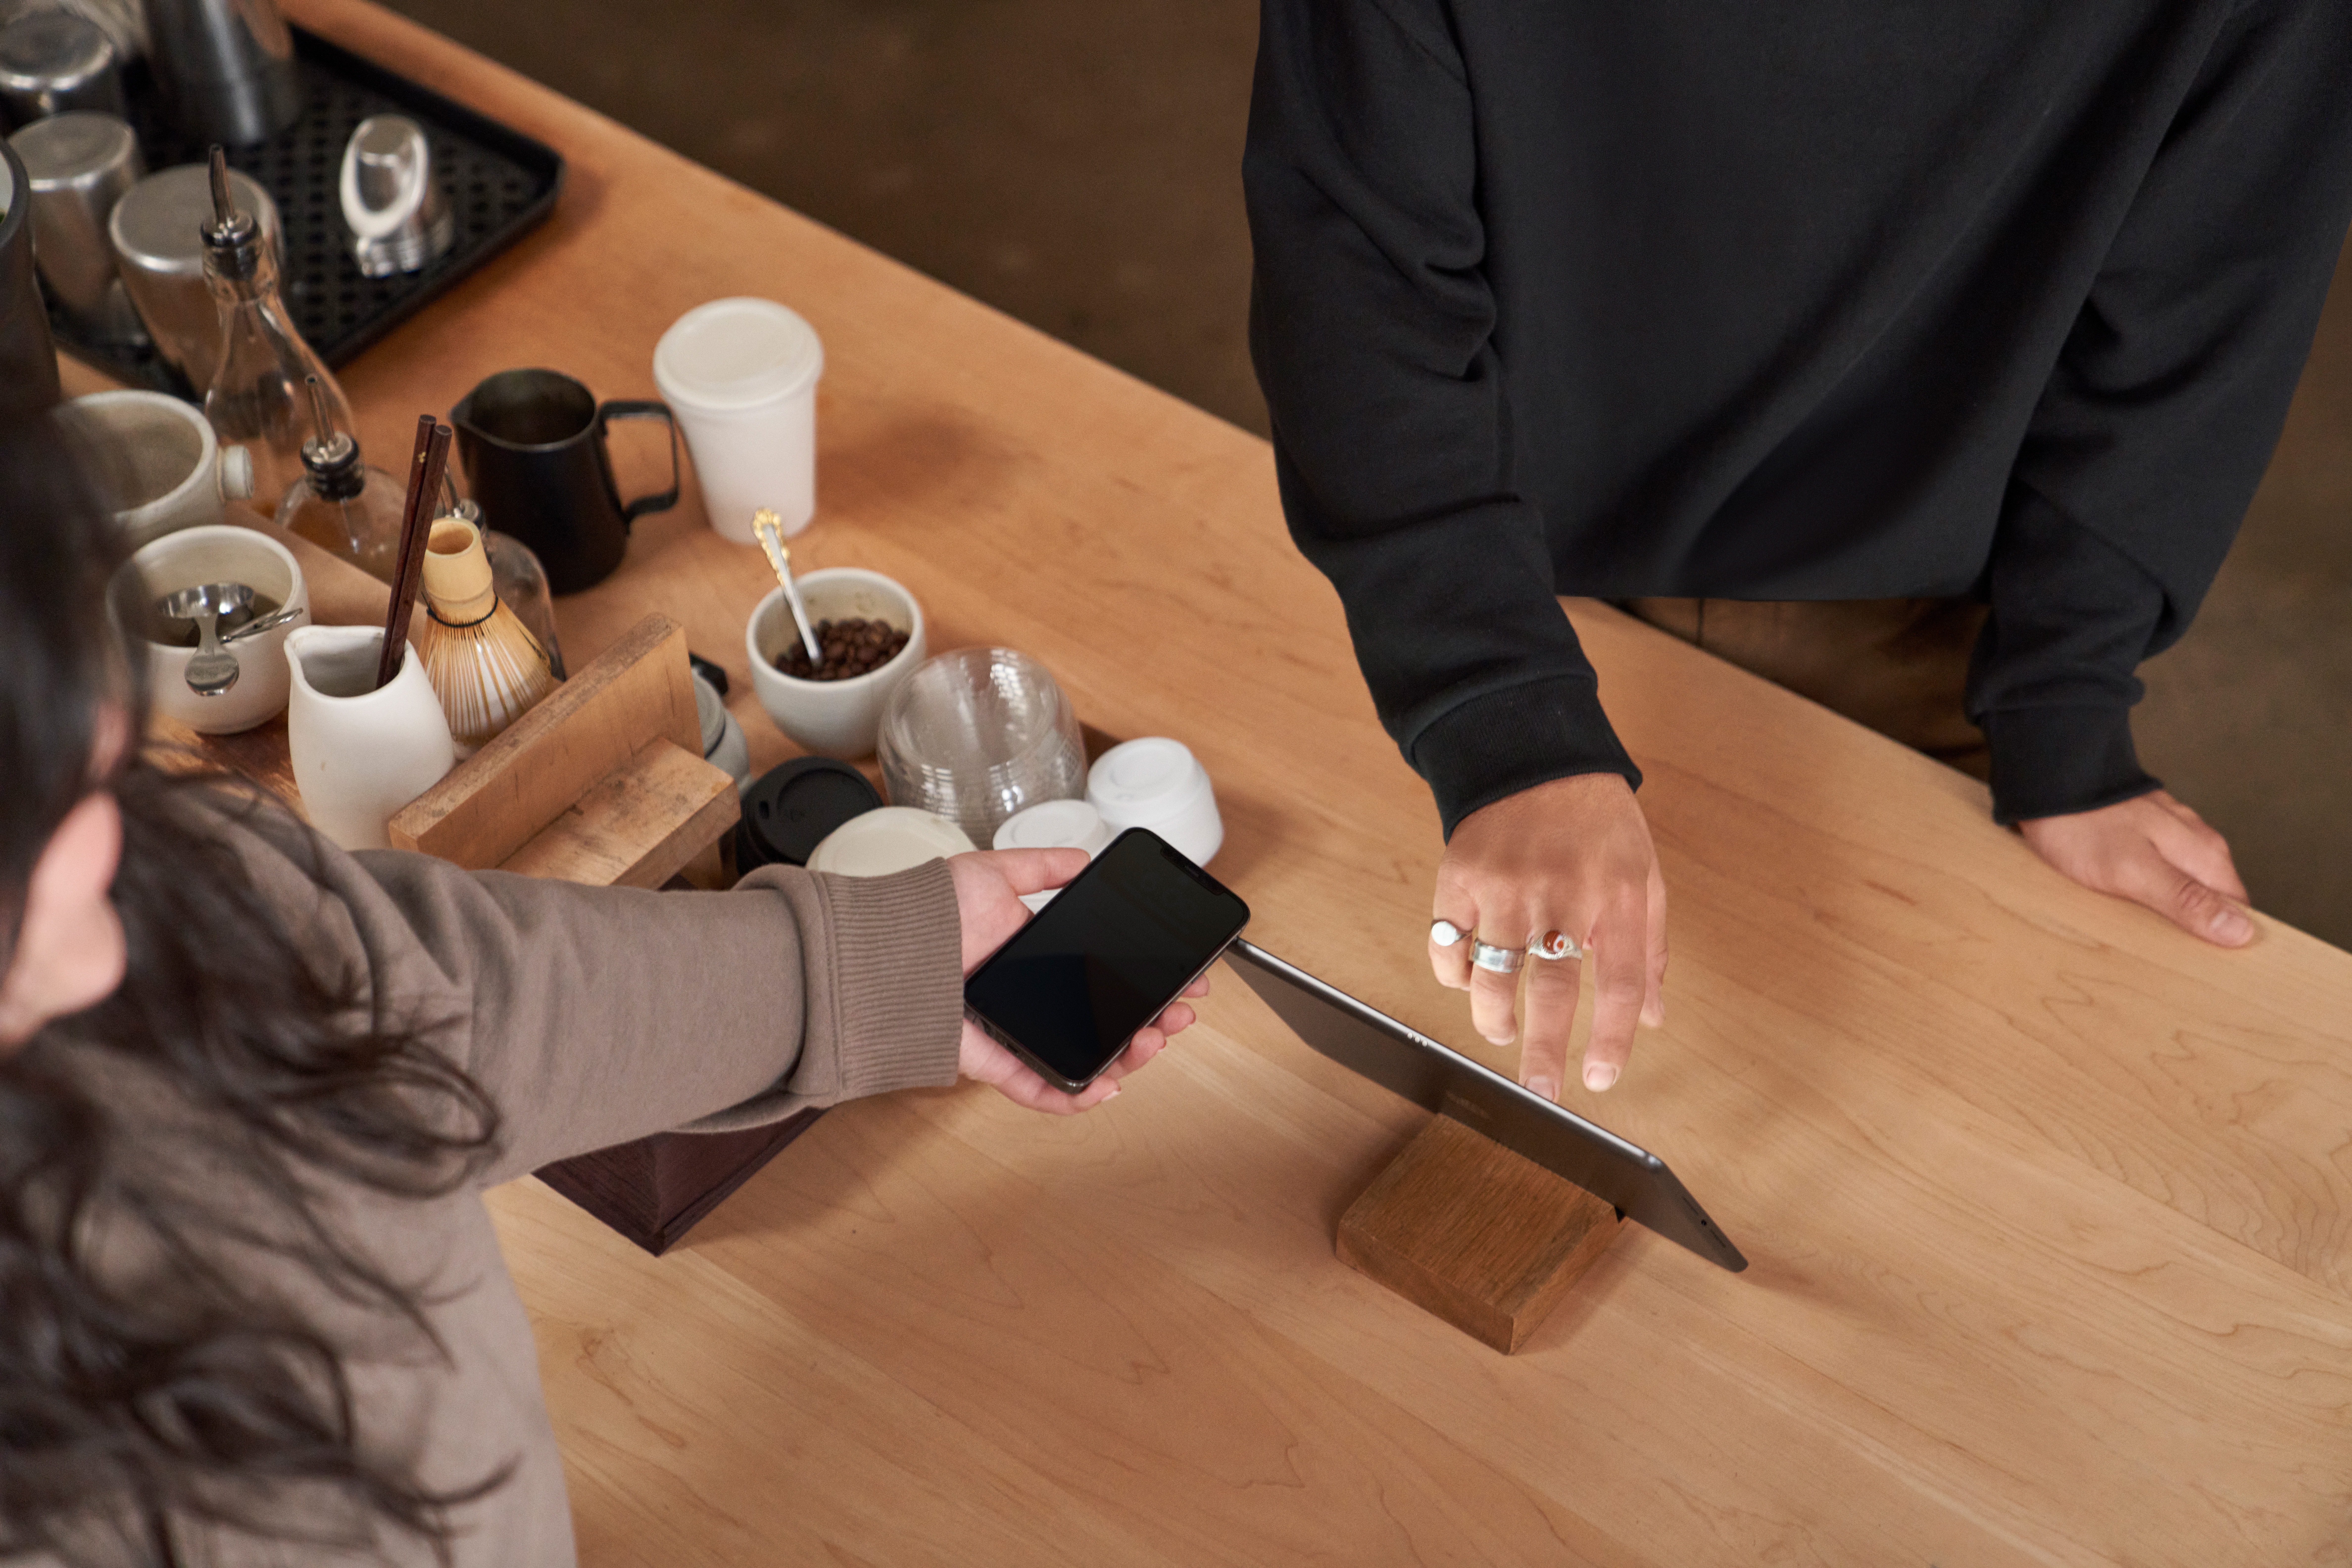 an image of a customer paying for a product using the digital wallet on their phone